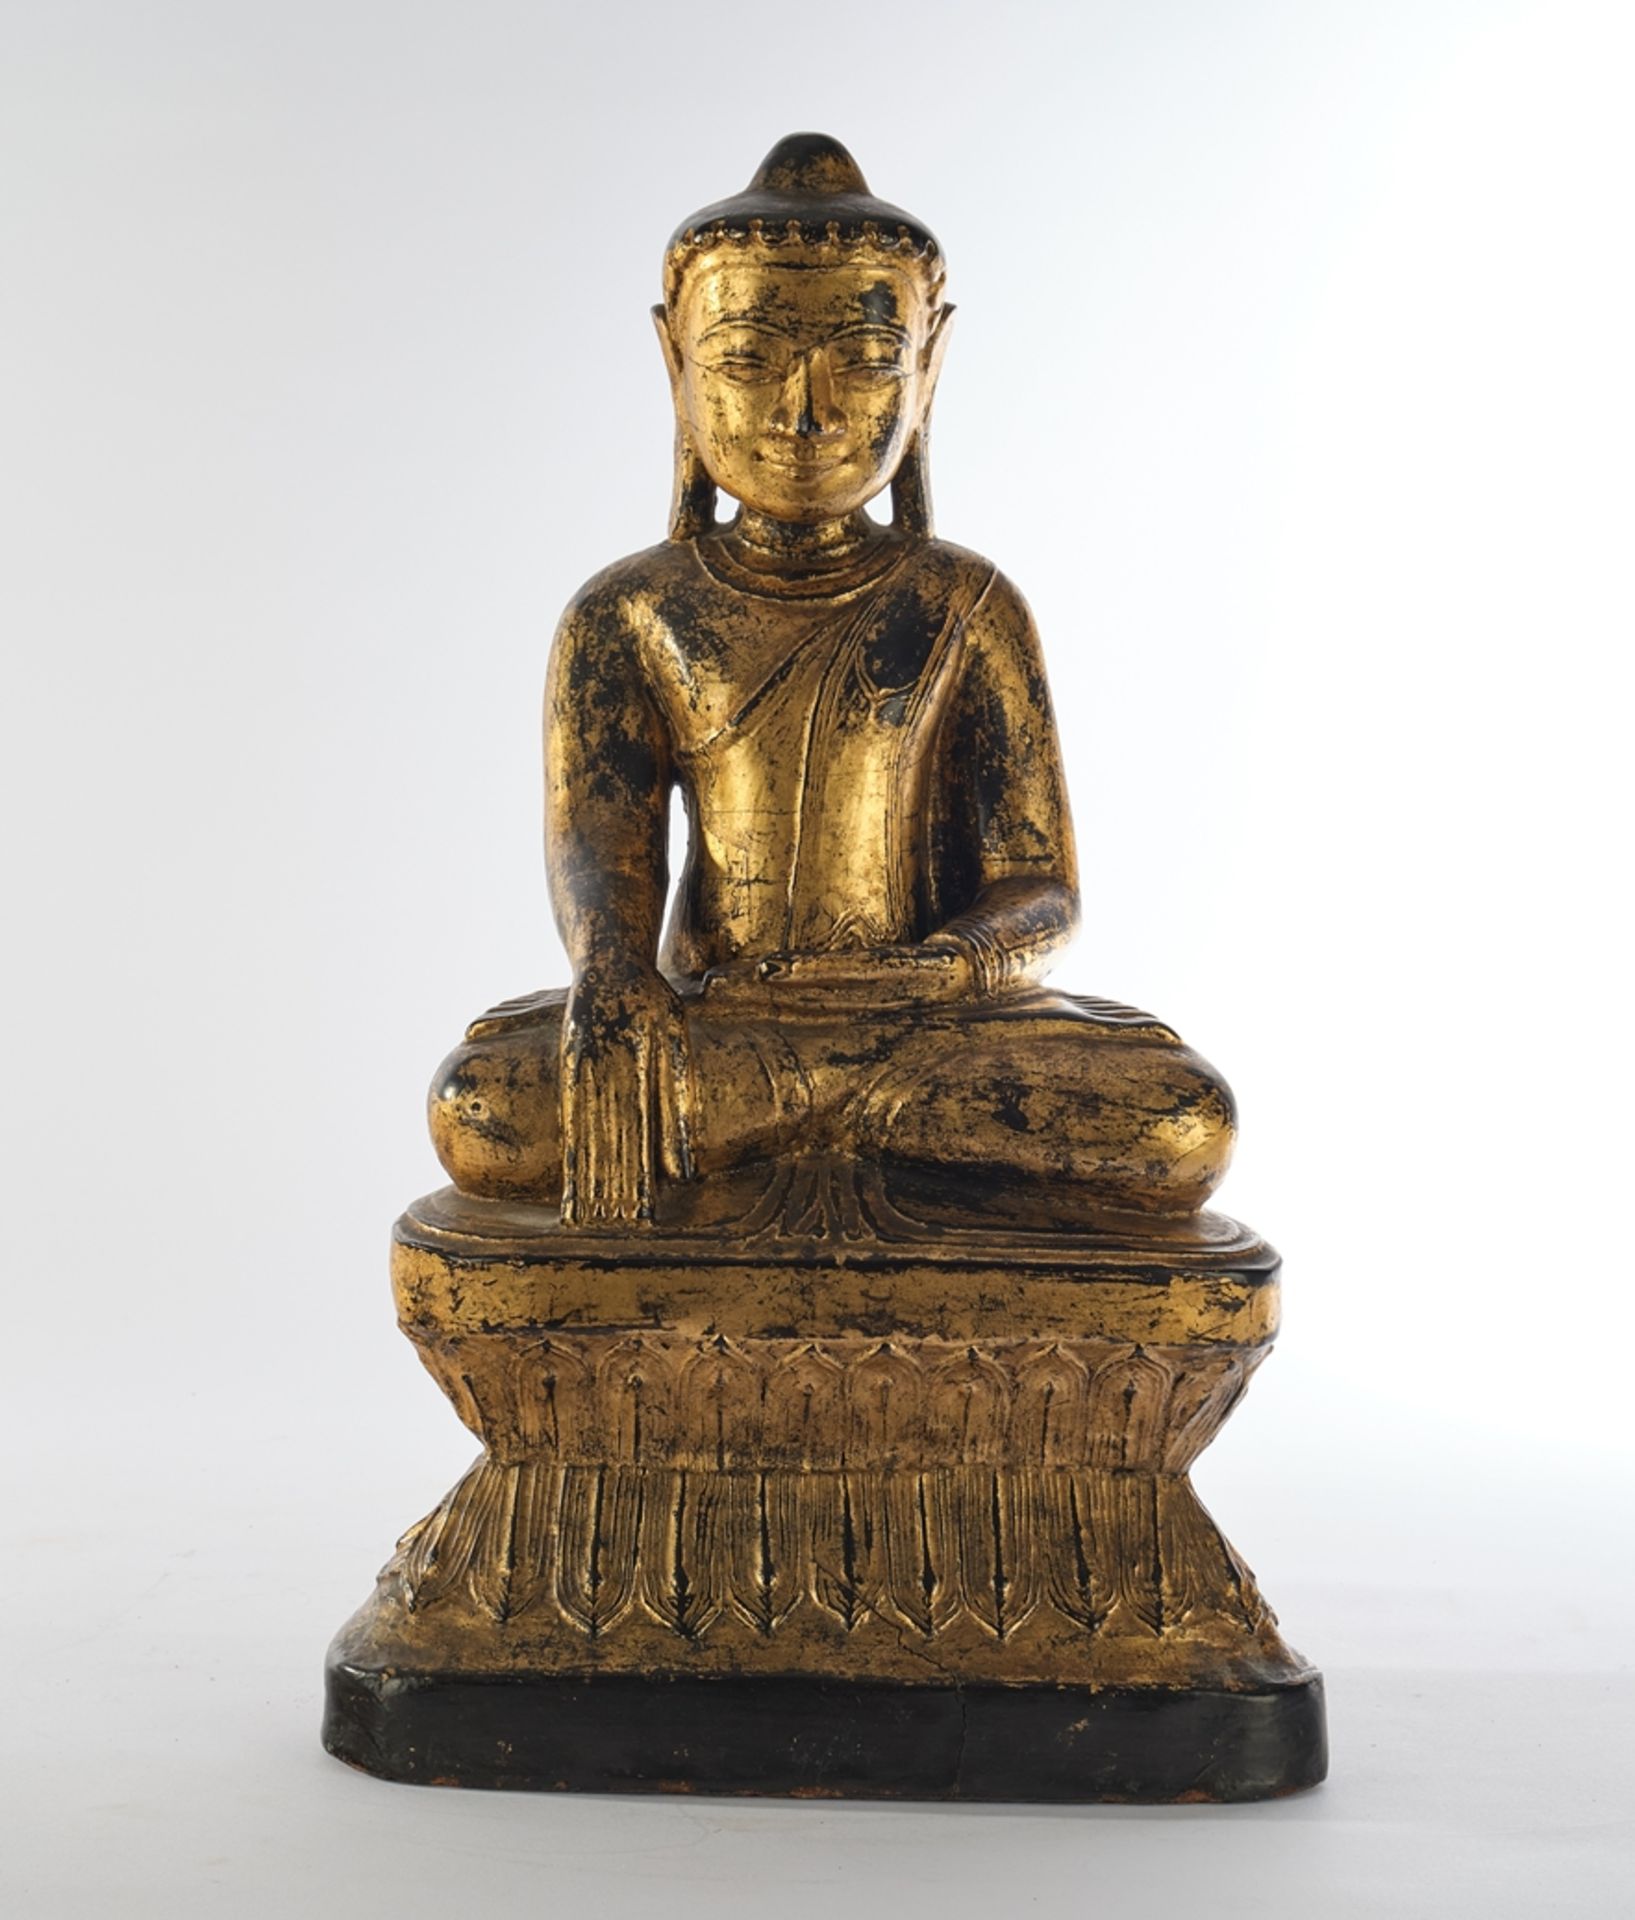 Buddha, Burma, 19th century, wood, carved, painted black and gilded, seated in meditation on a plin